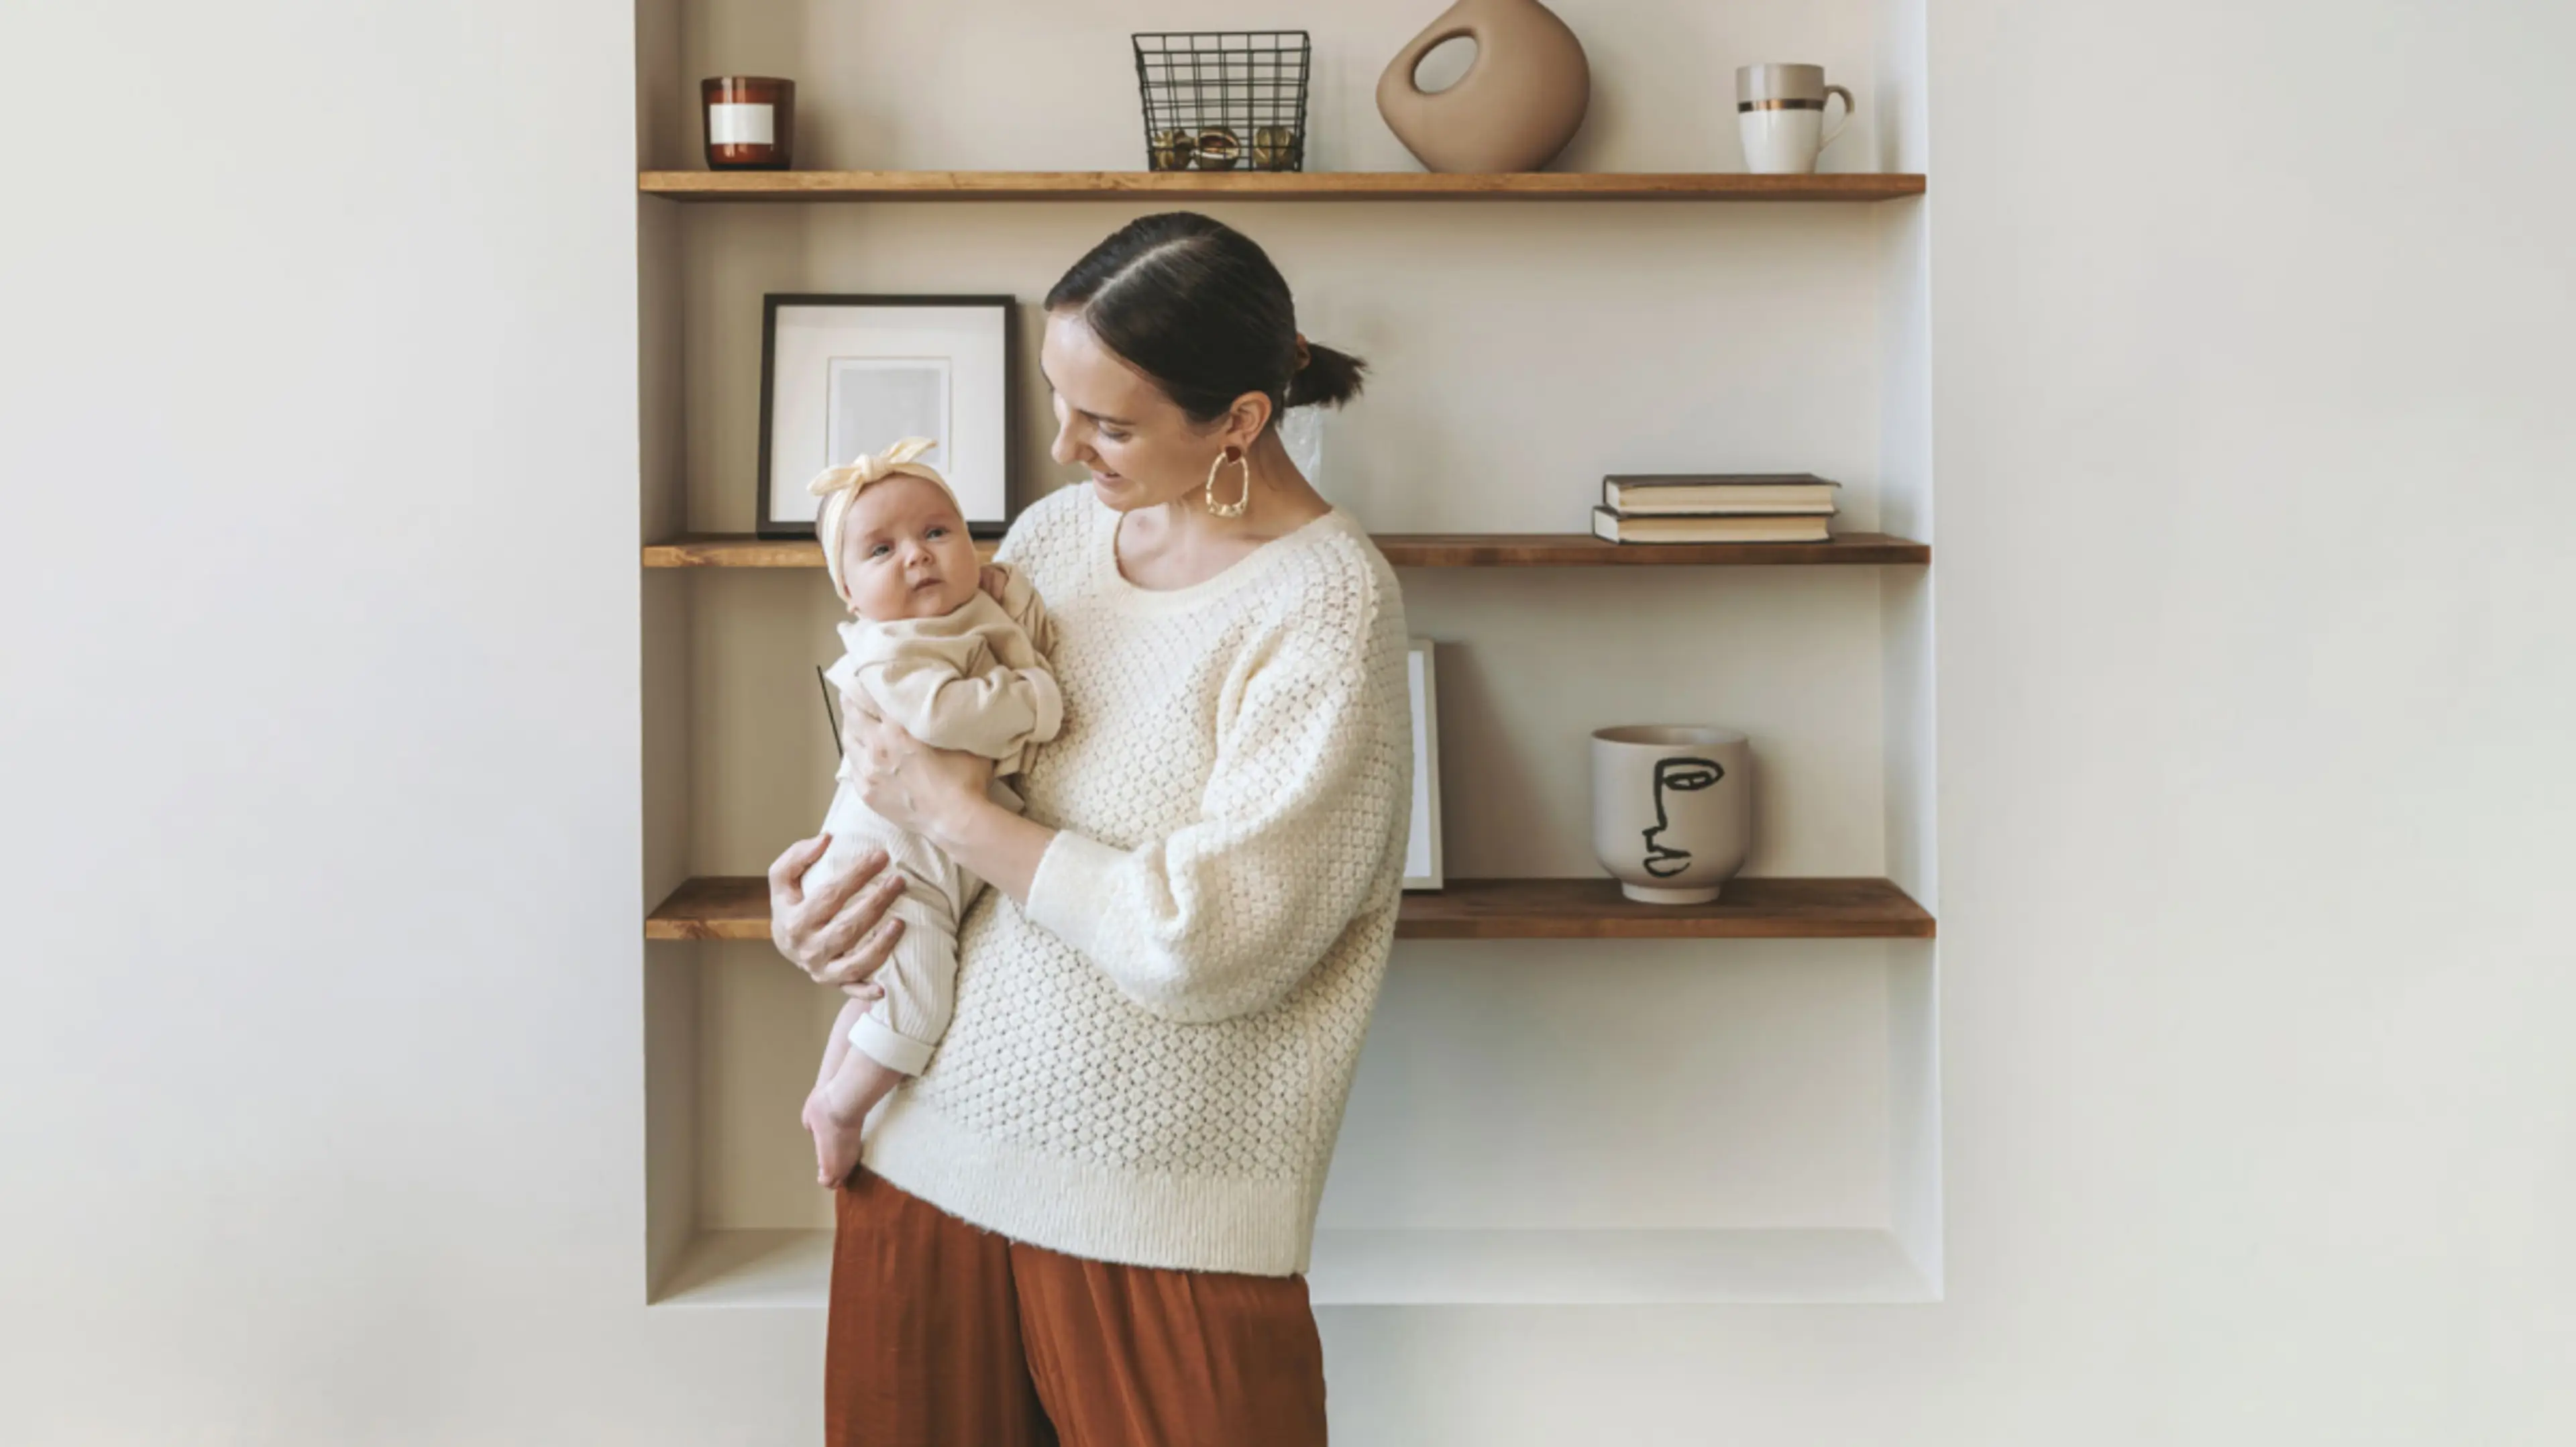 Banishing Perfectionism: 3 Strategies to Squash Self-Doubt as a New Mom